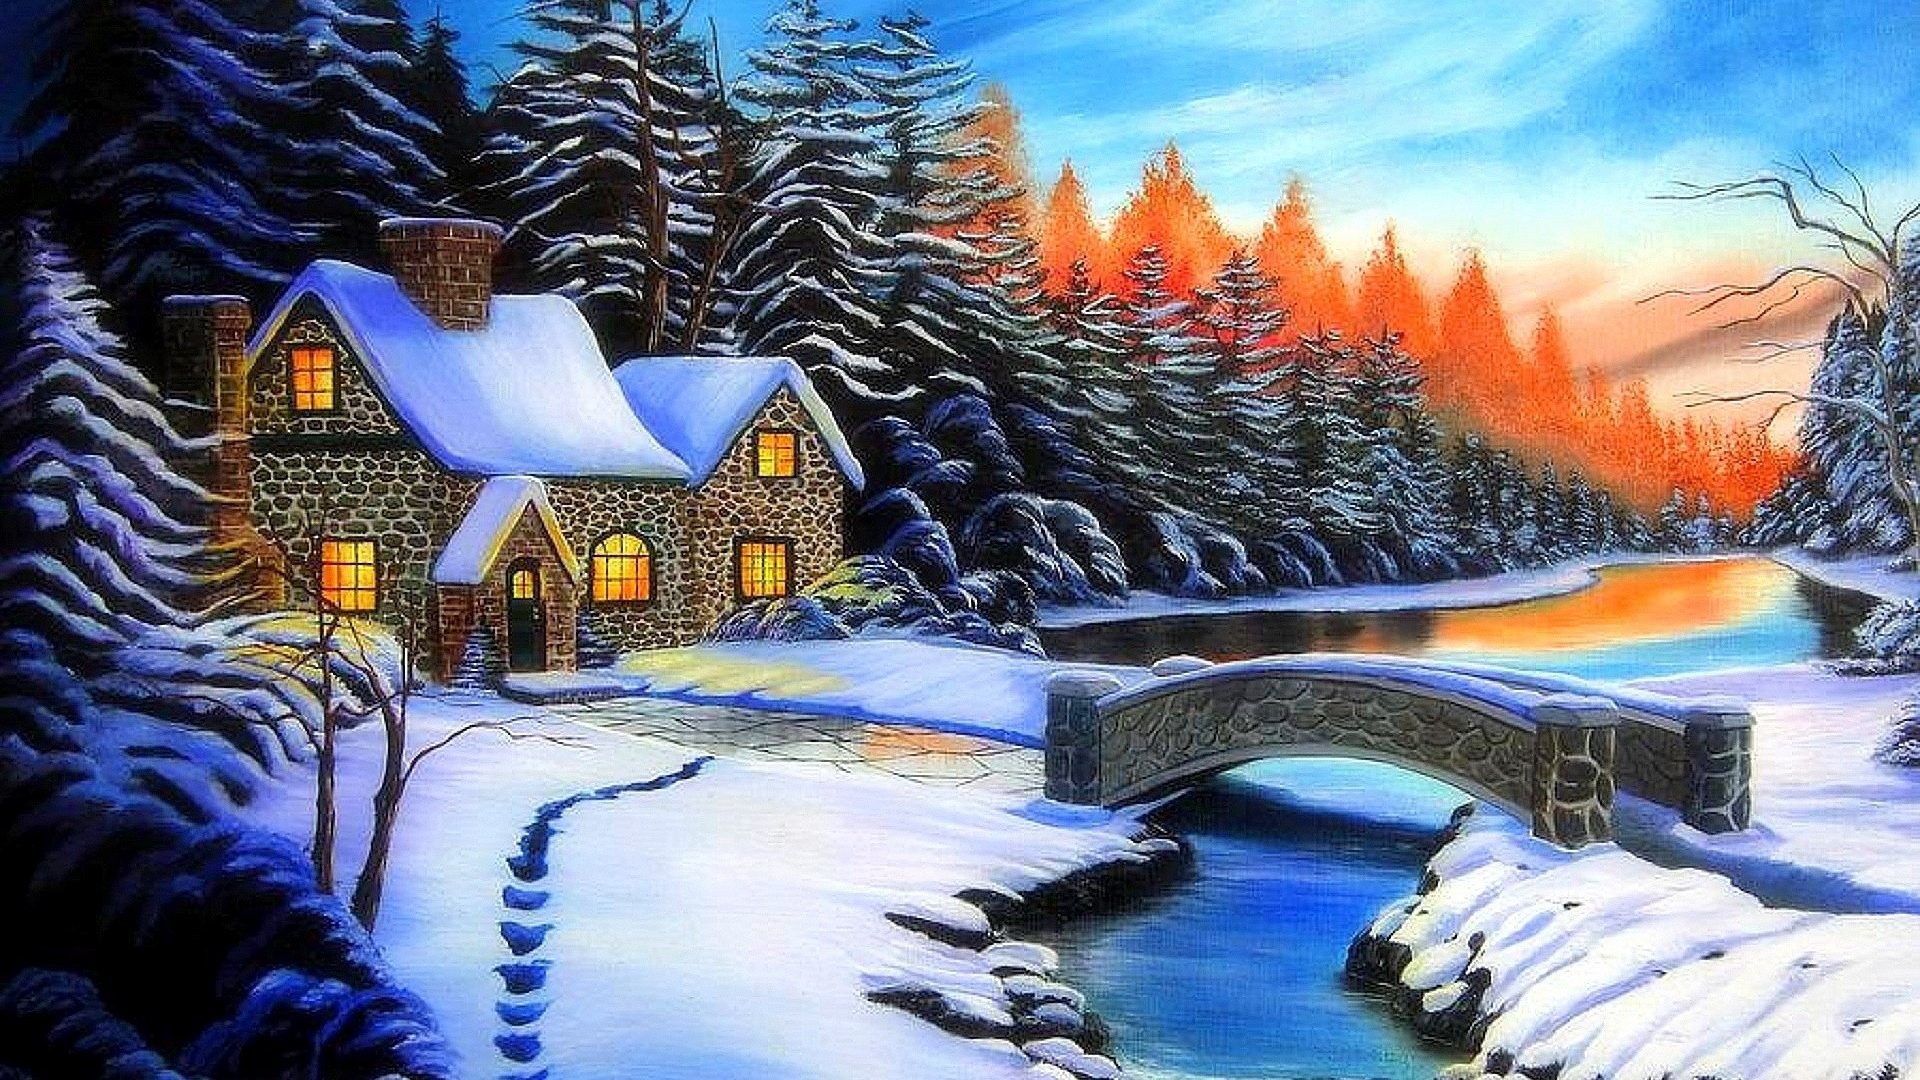 1920x1080 Traditional Colors Cool Christmas Drawings Greetings Cozy Love Architecture  Glow Superb Snow Landscapes Art Trees Cottages